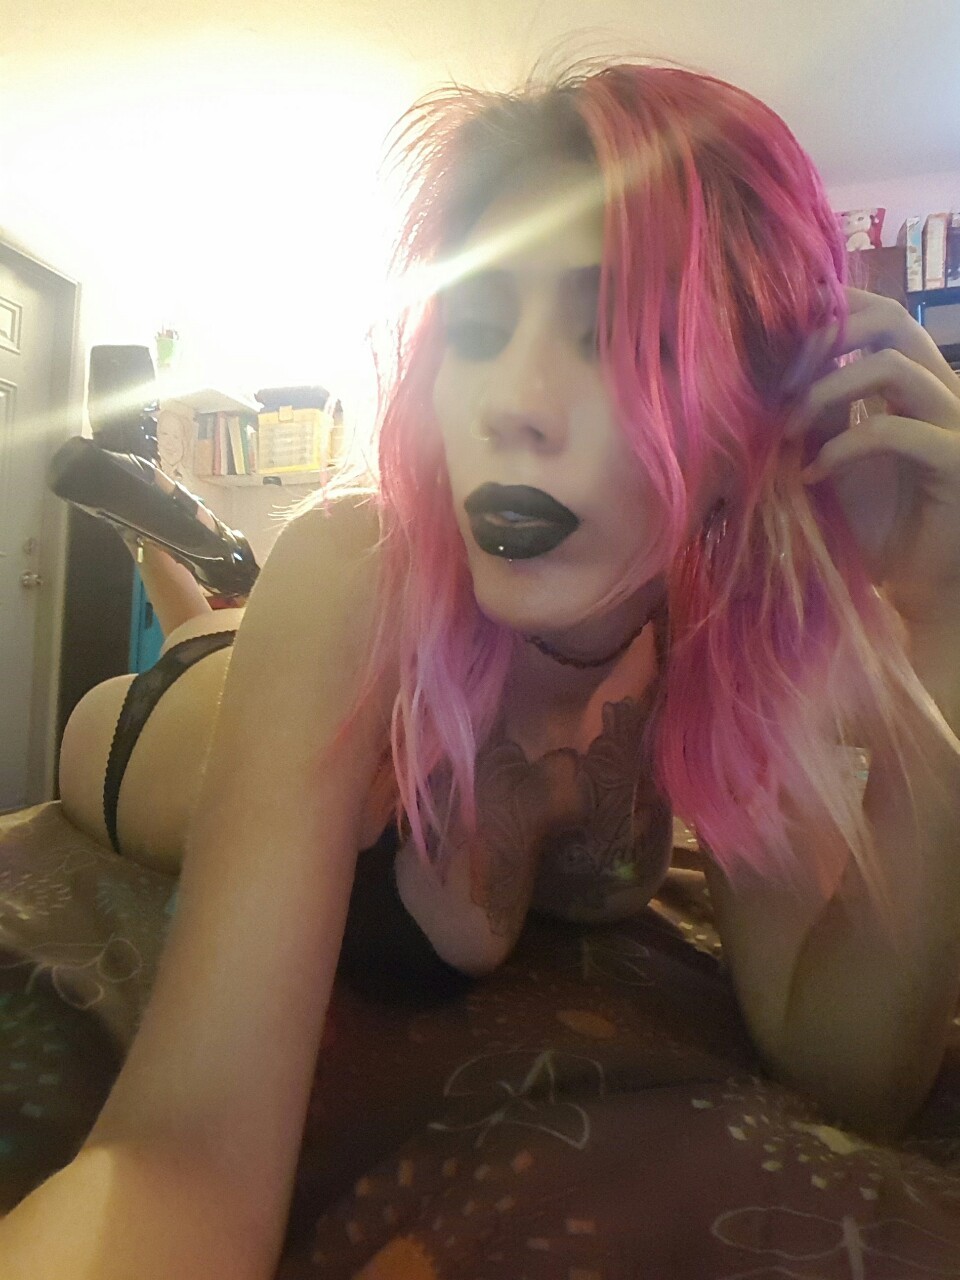 Love My All sexy Goth Look, hope you do too ;)  